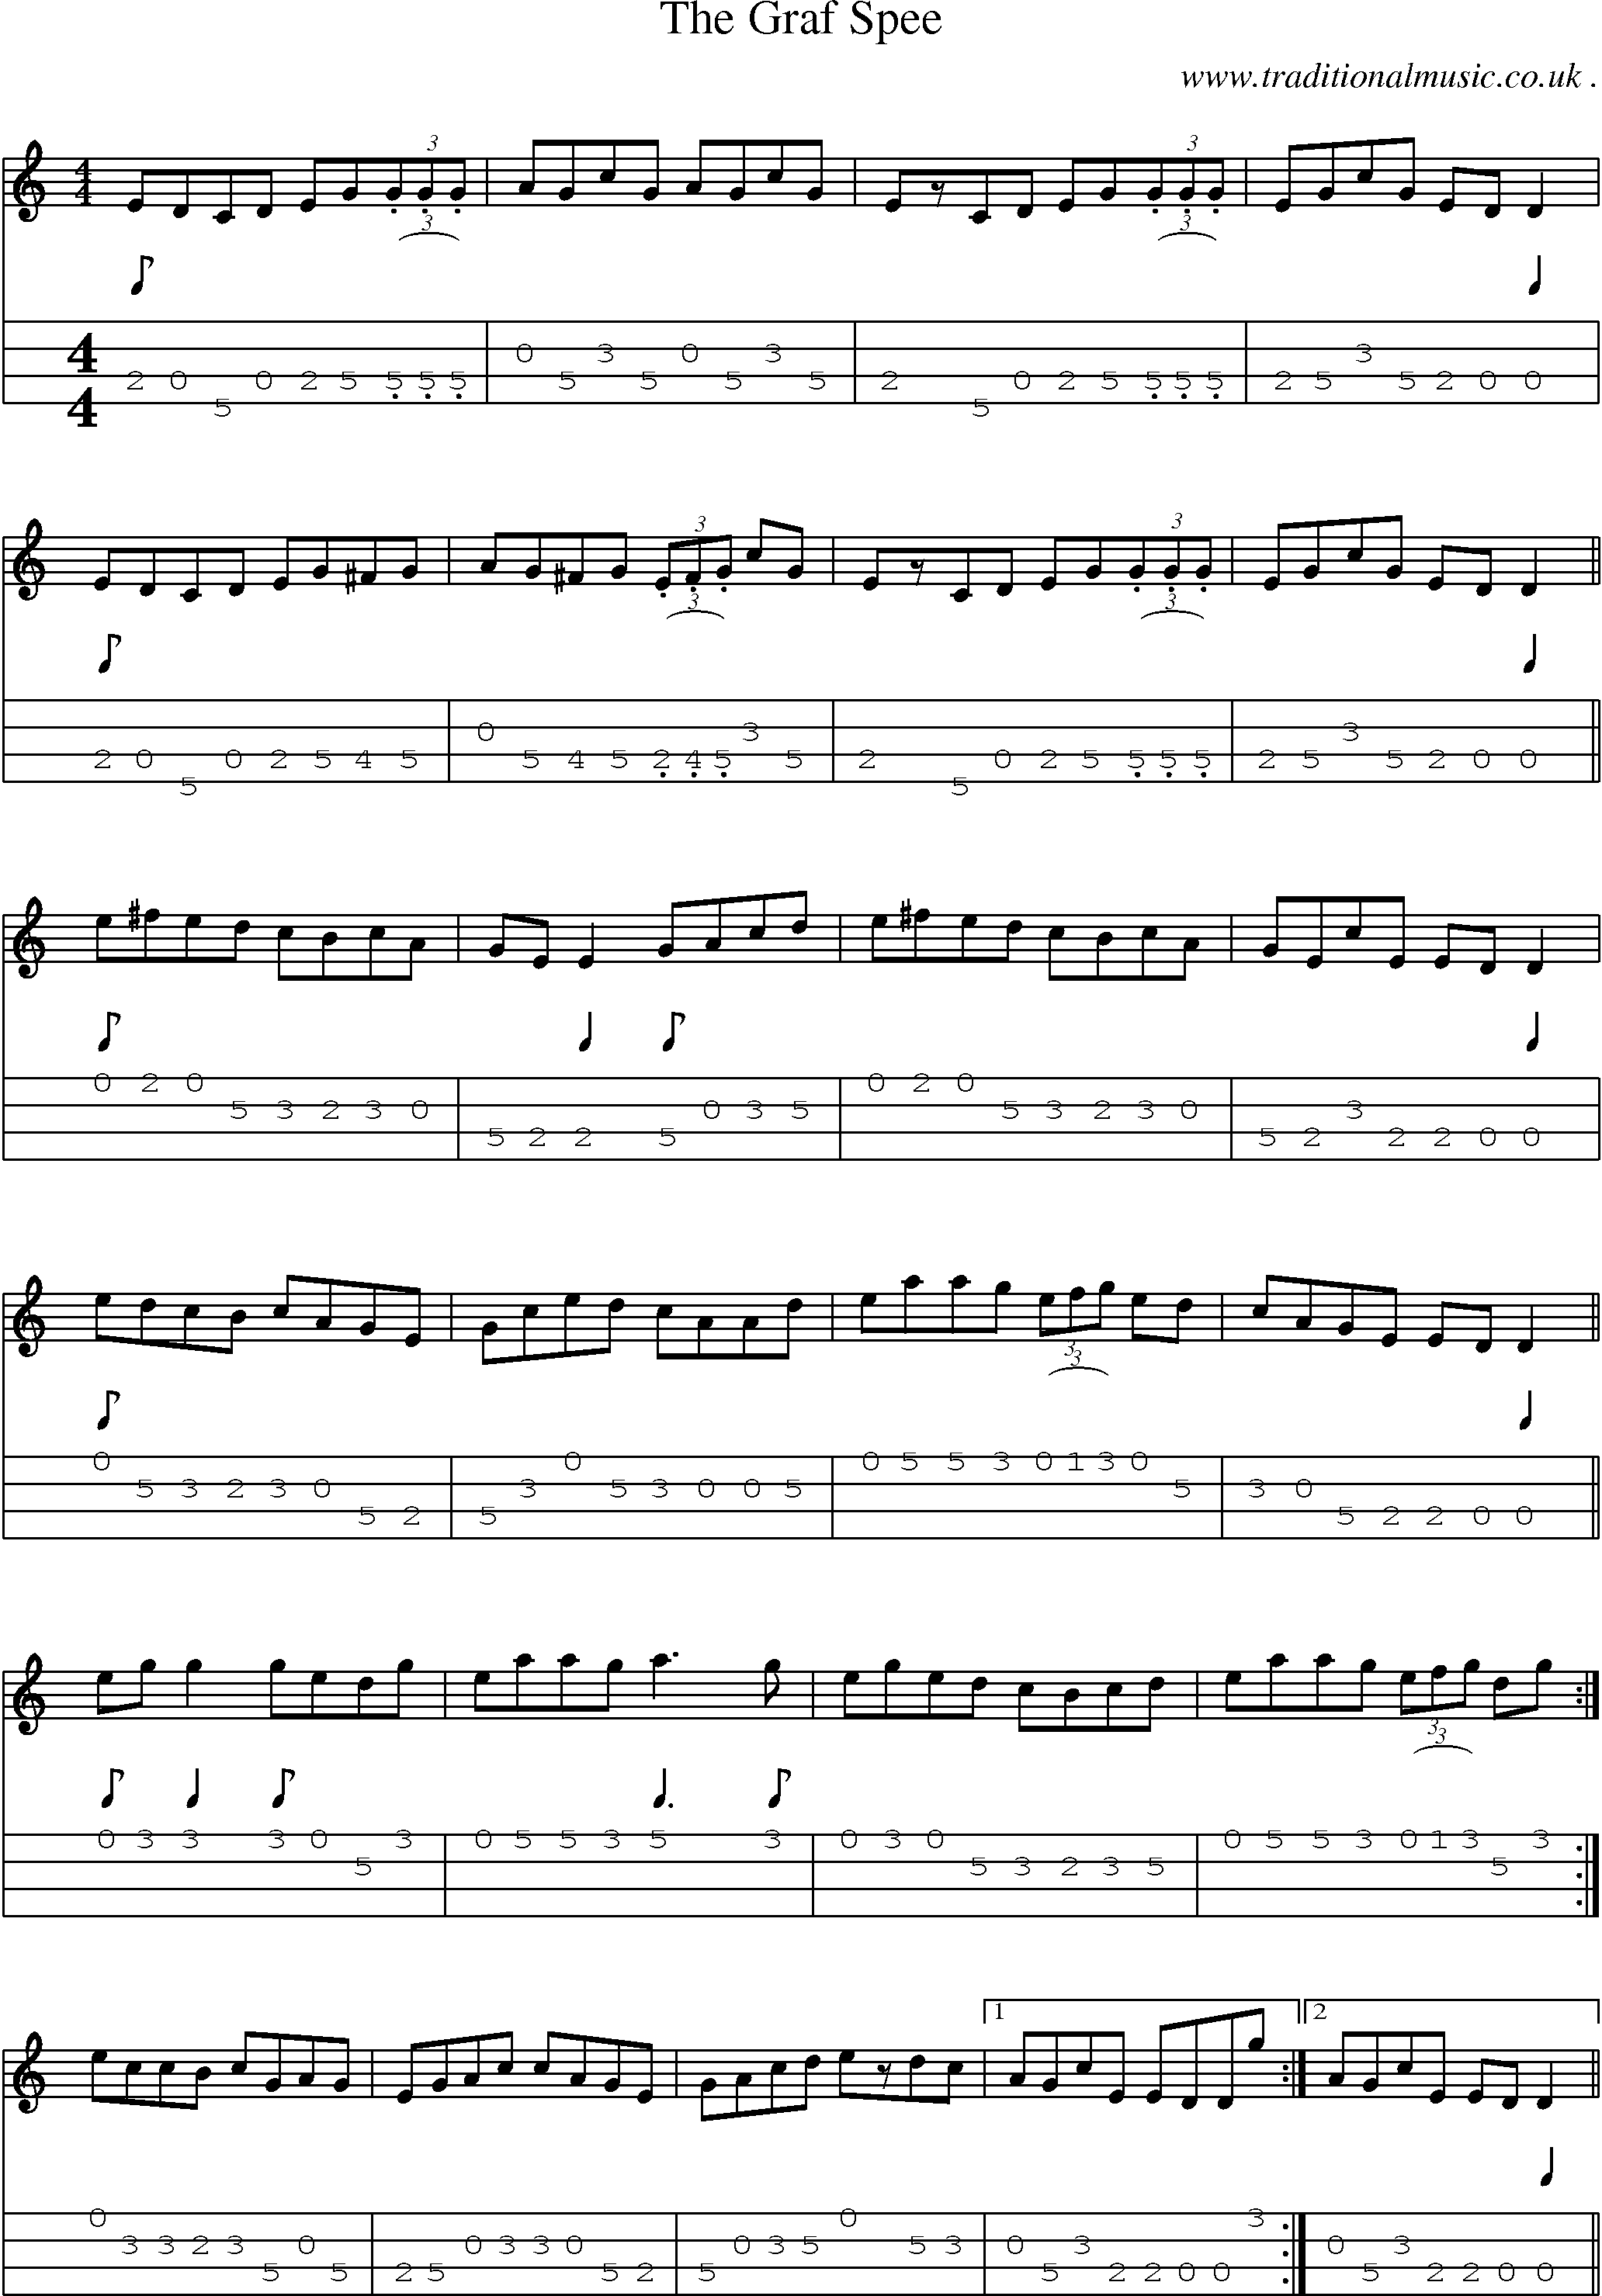 Sheet-Music and Mandolin Tabs for The Graf Spee